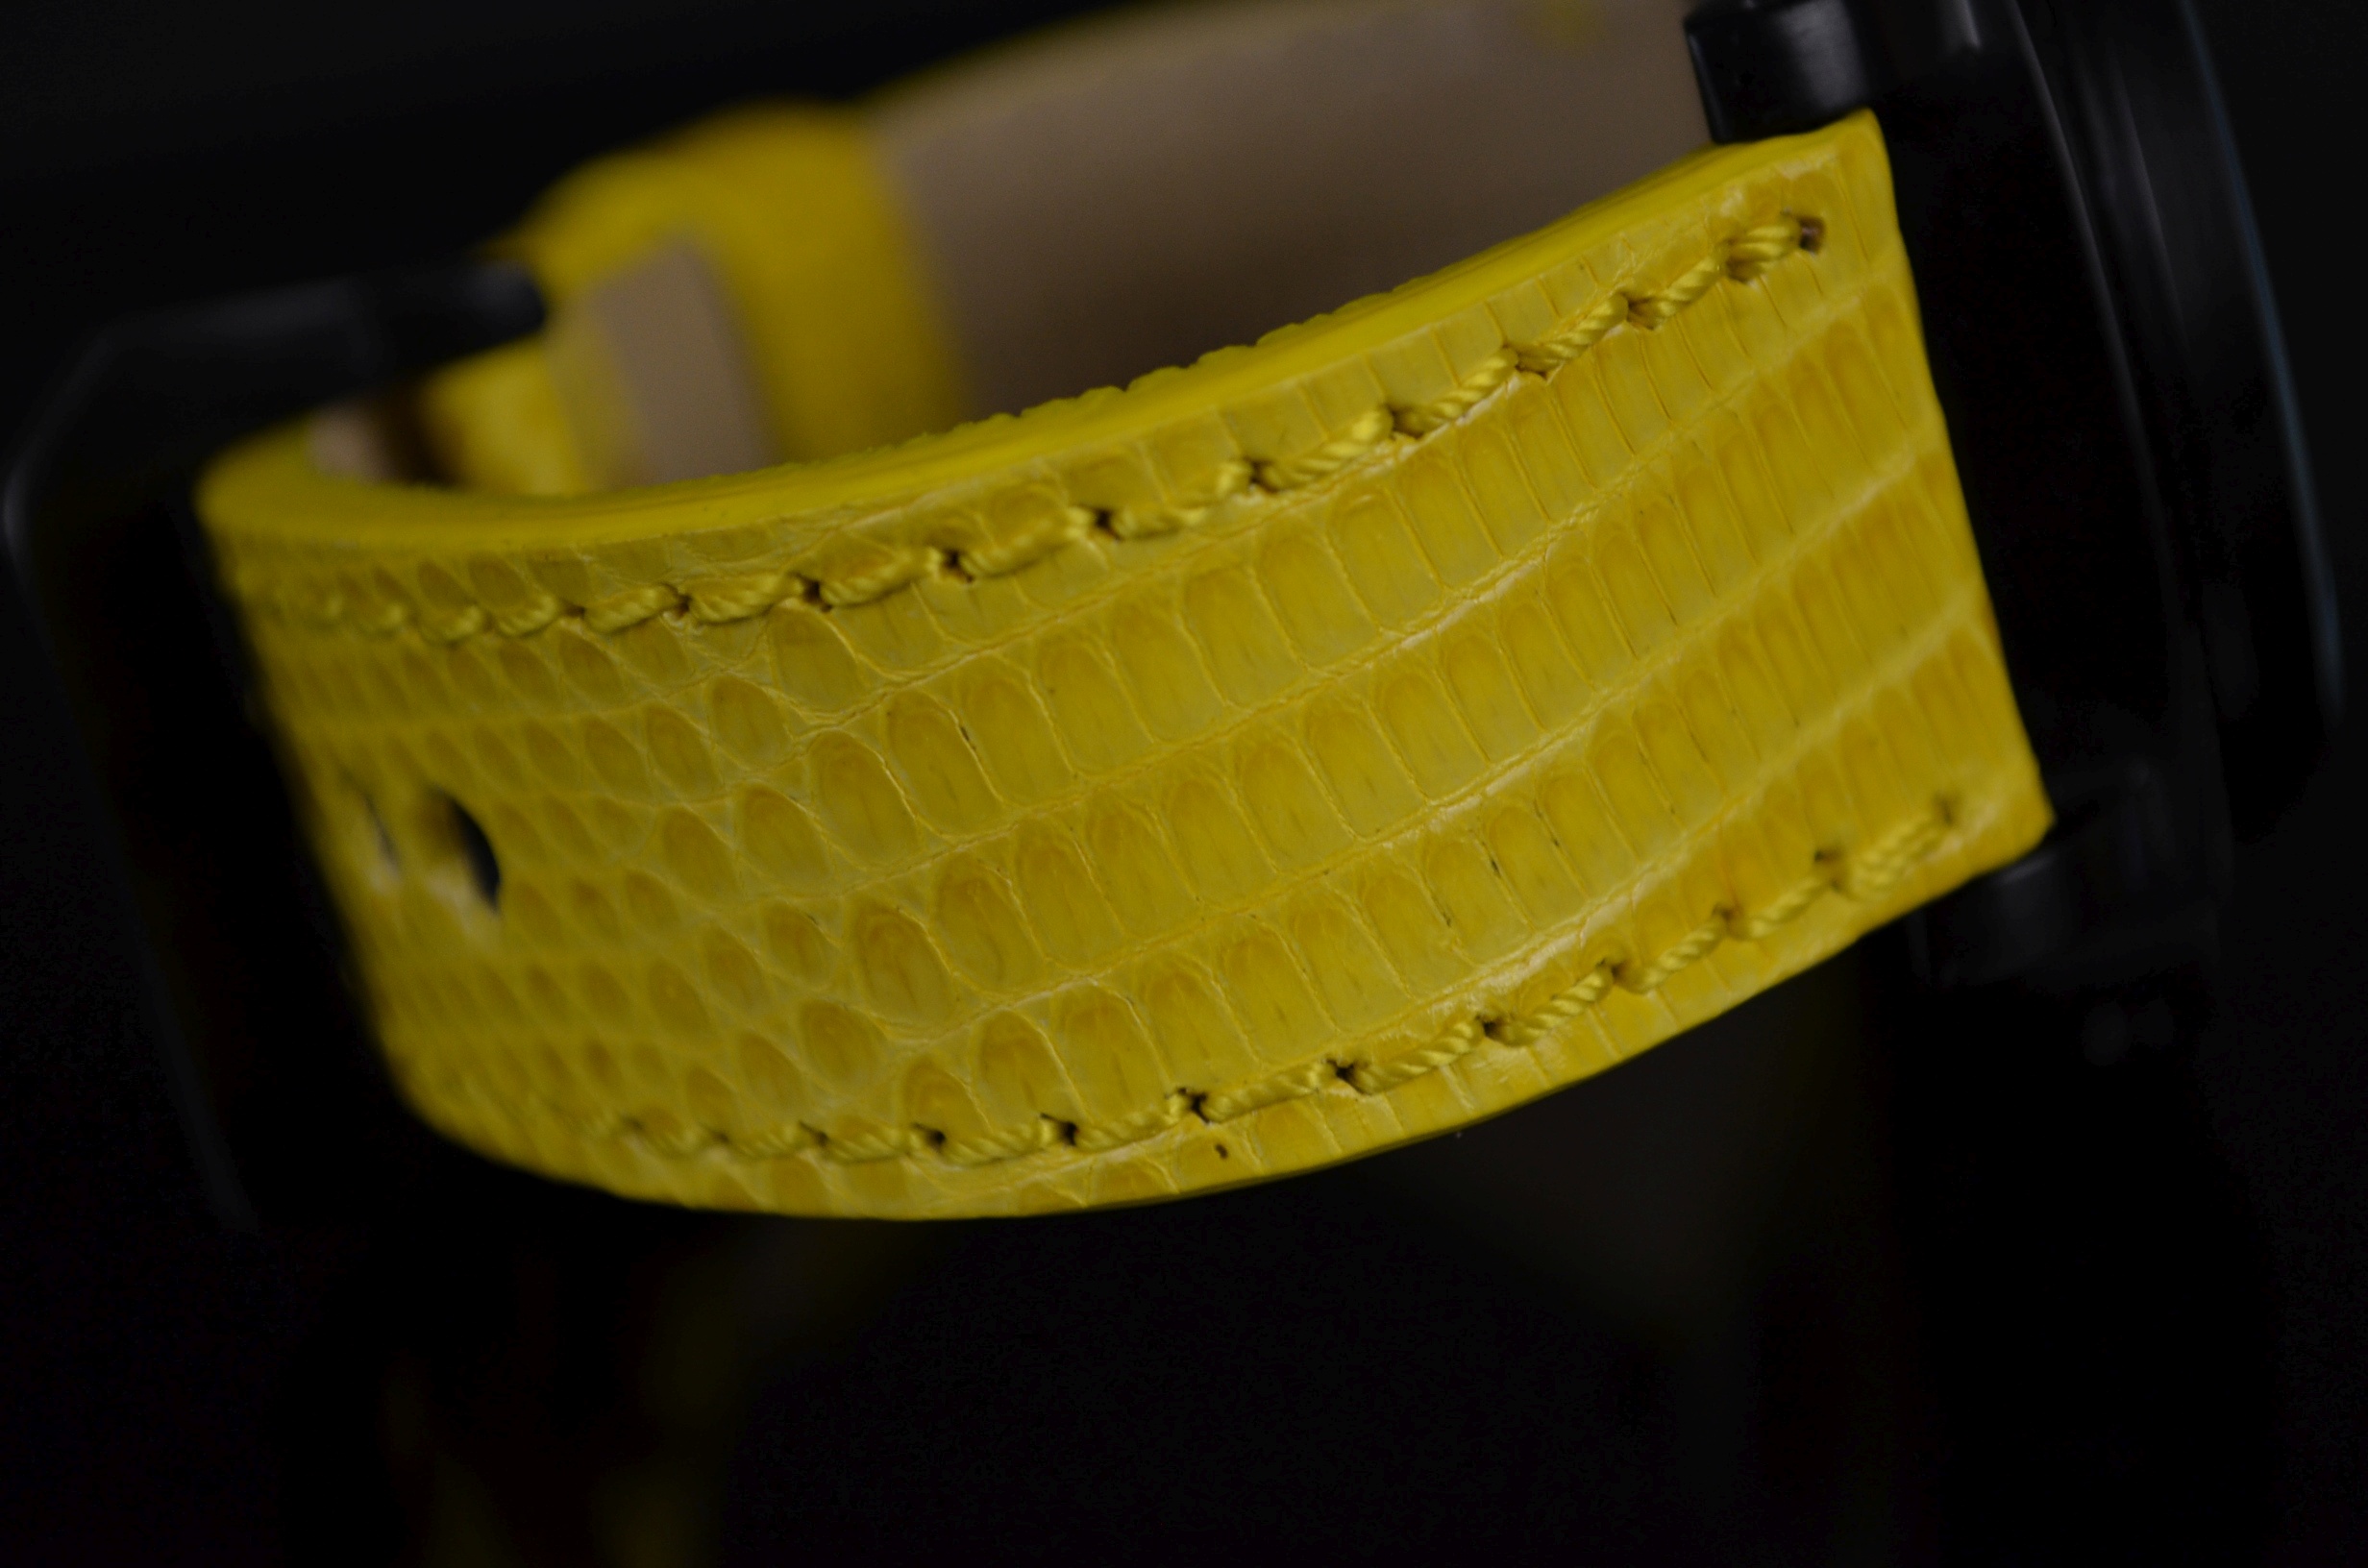 YELLOW SHINY is one of our hand crafted watch straps. Available in yellow color, 3.5 - 4 mm thick.